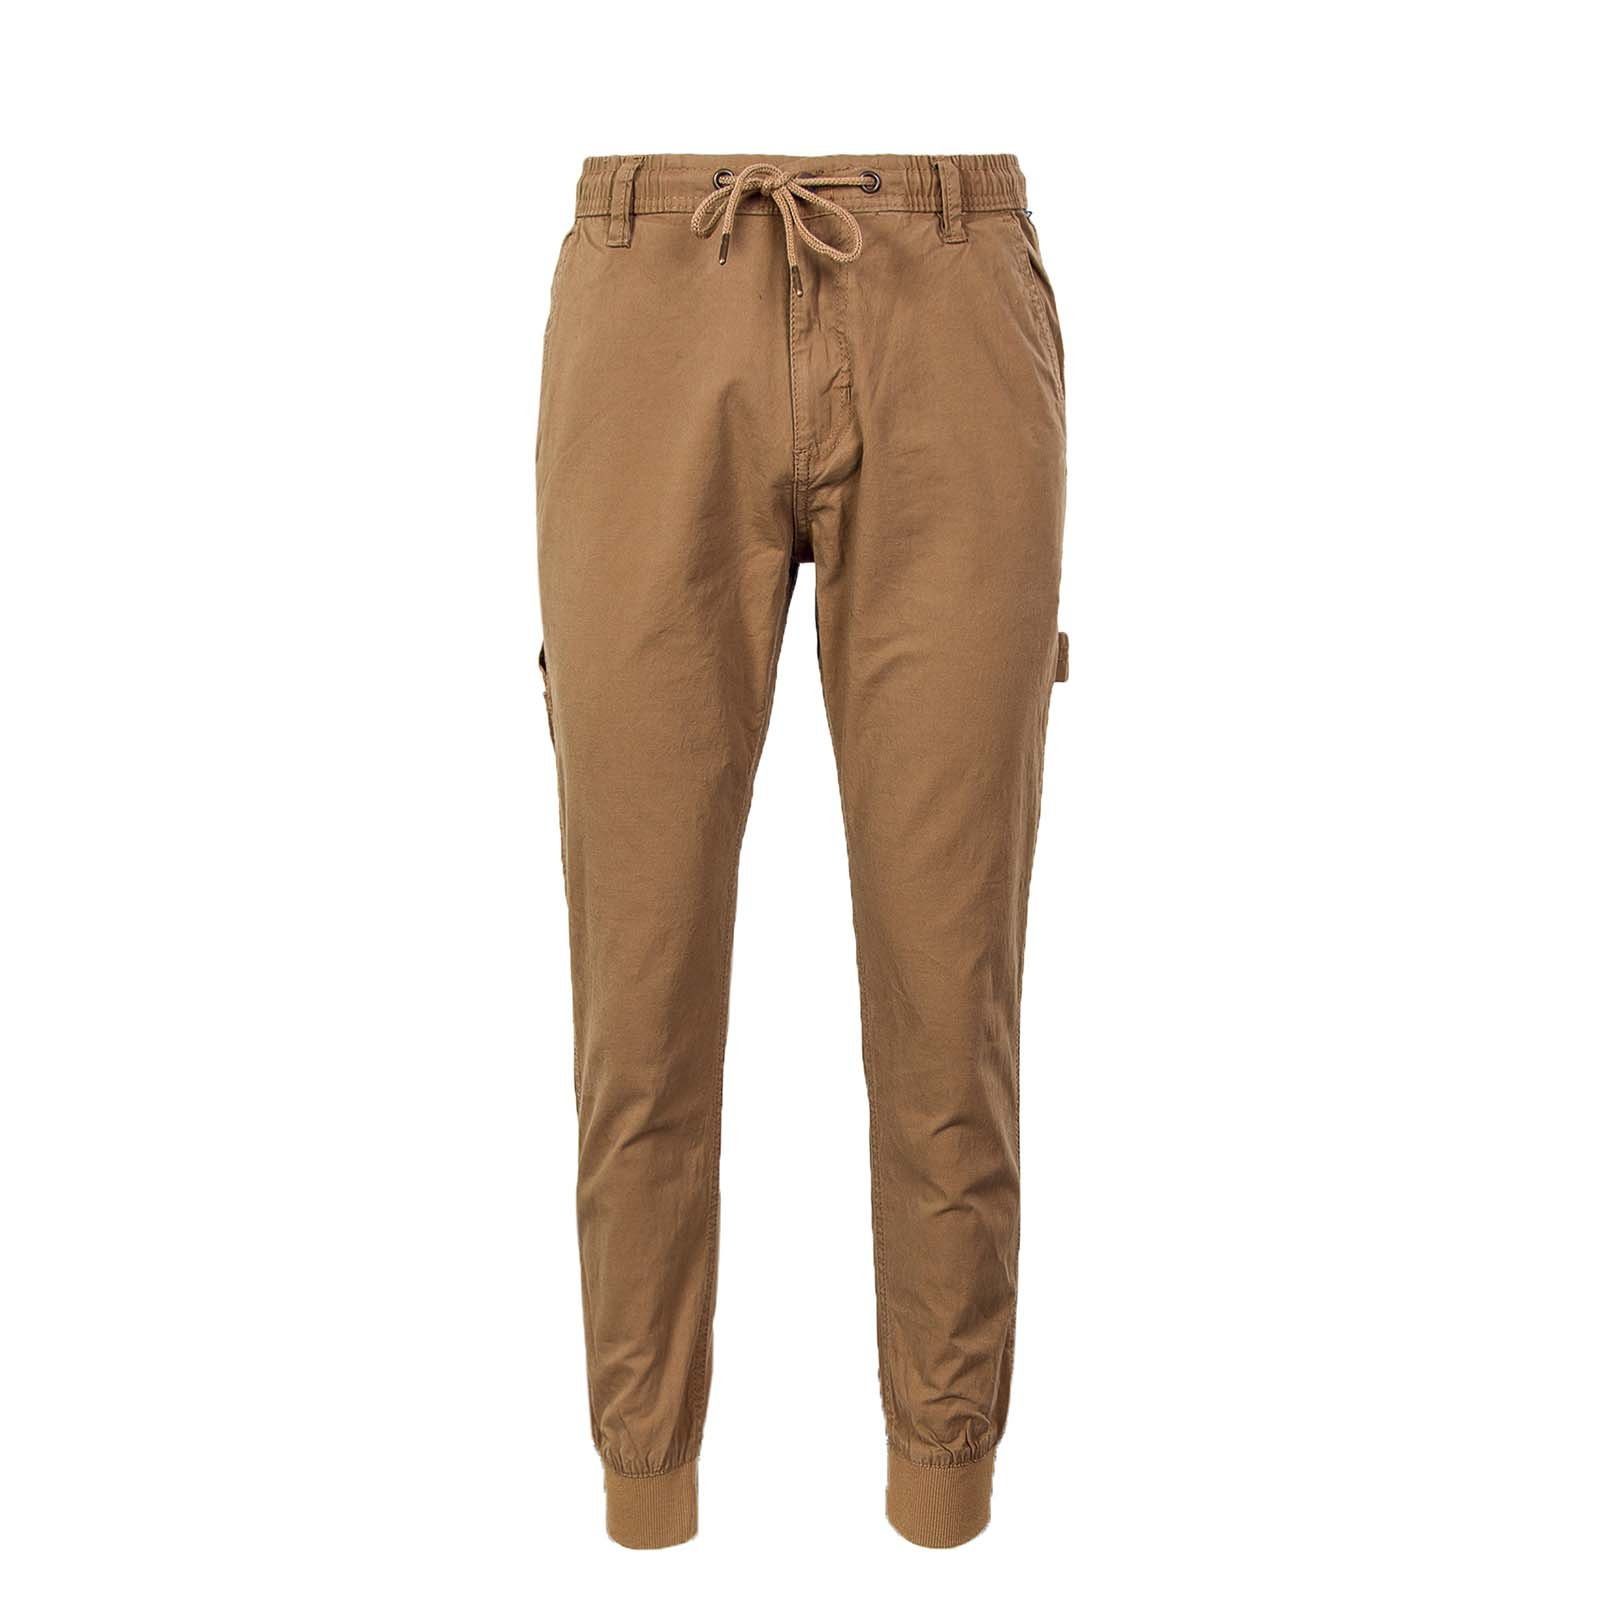 REELL Stoffhose Rib Worker LC 150 Ocre